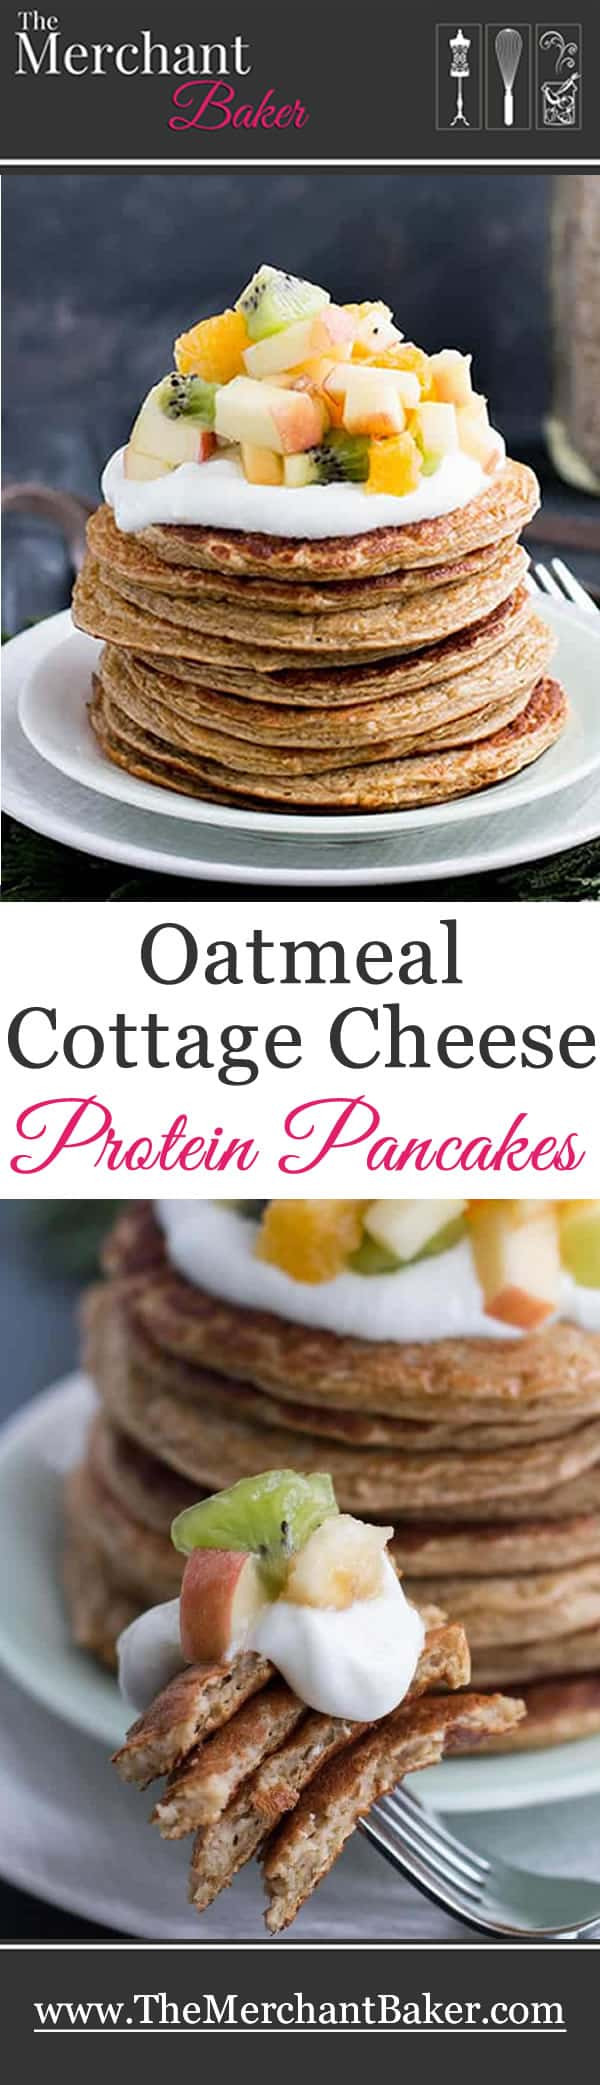 Cottage Cheese Oat Pancakes
 Oatmeal Cottage Cheese Protein Pancakes The Merchant Baker